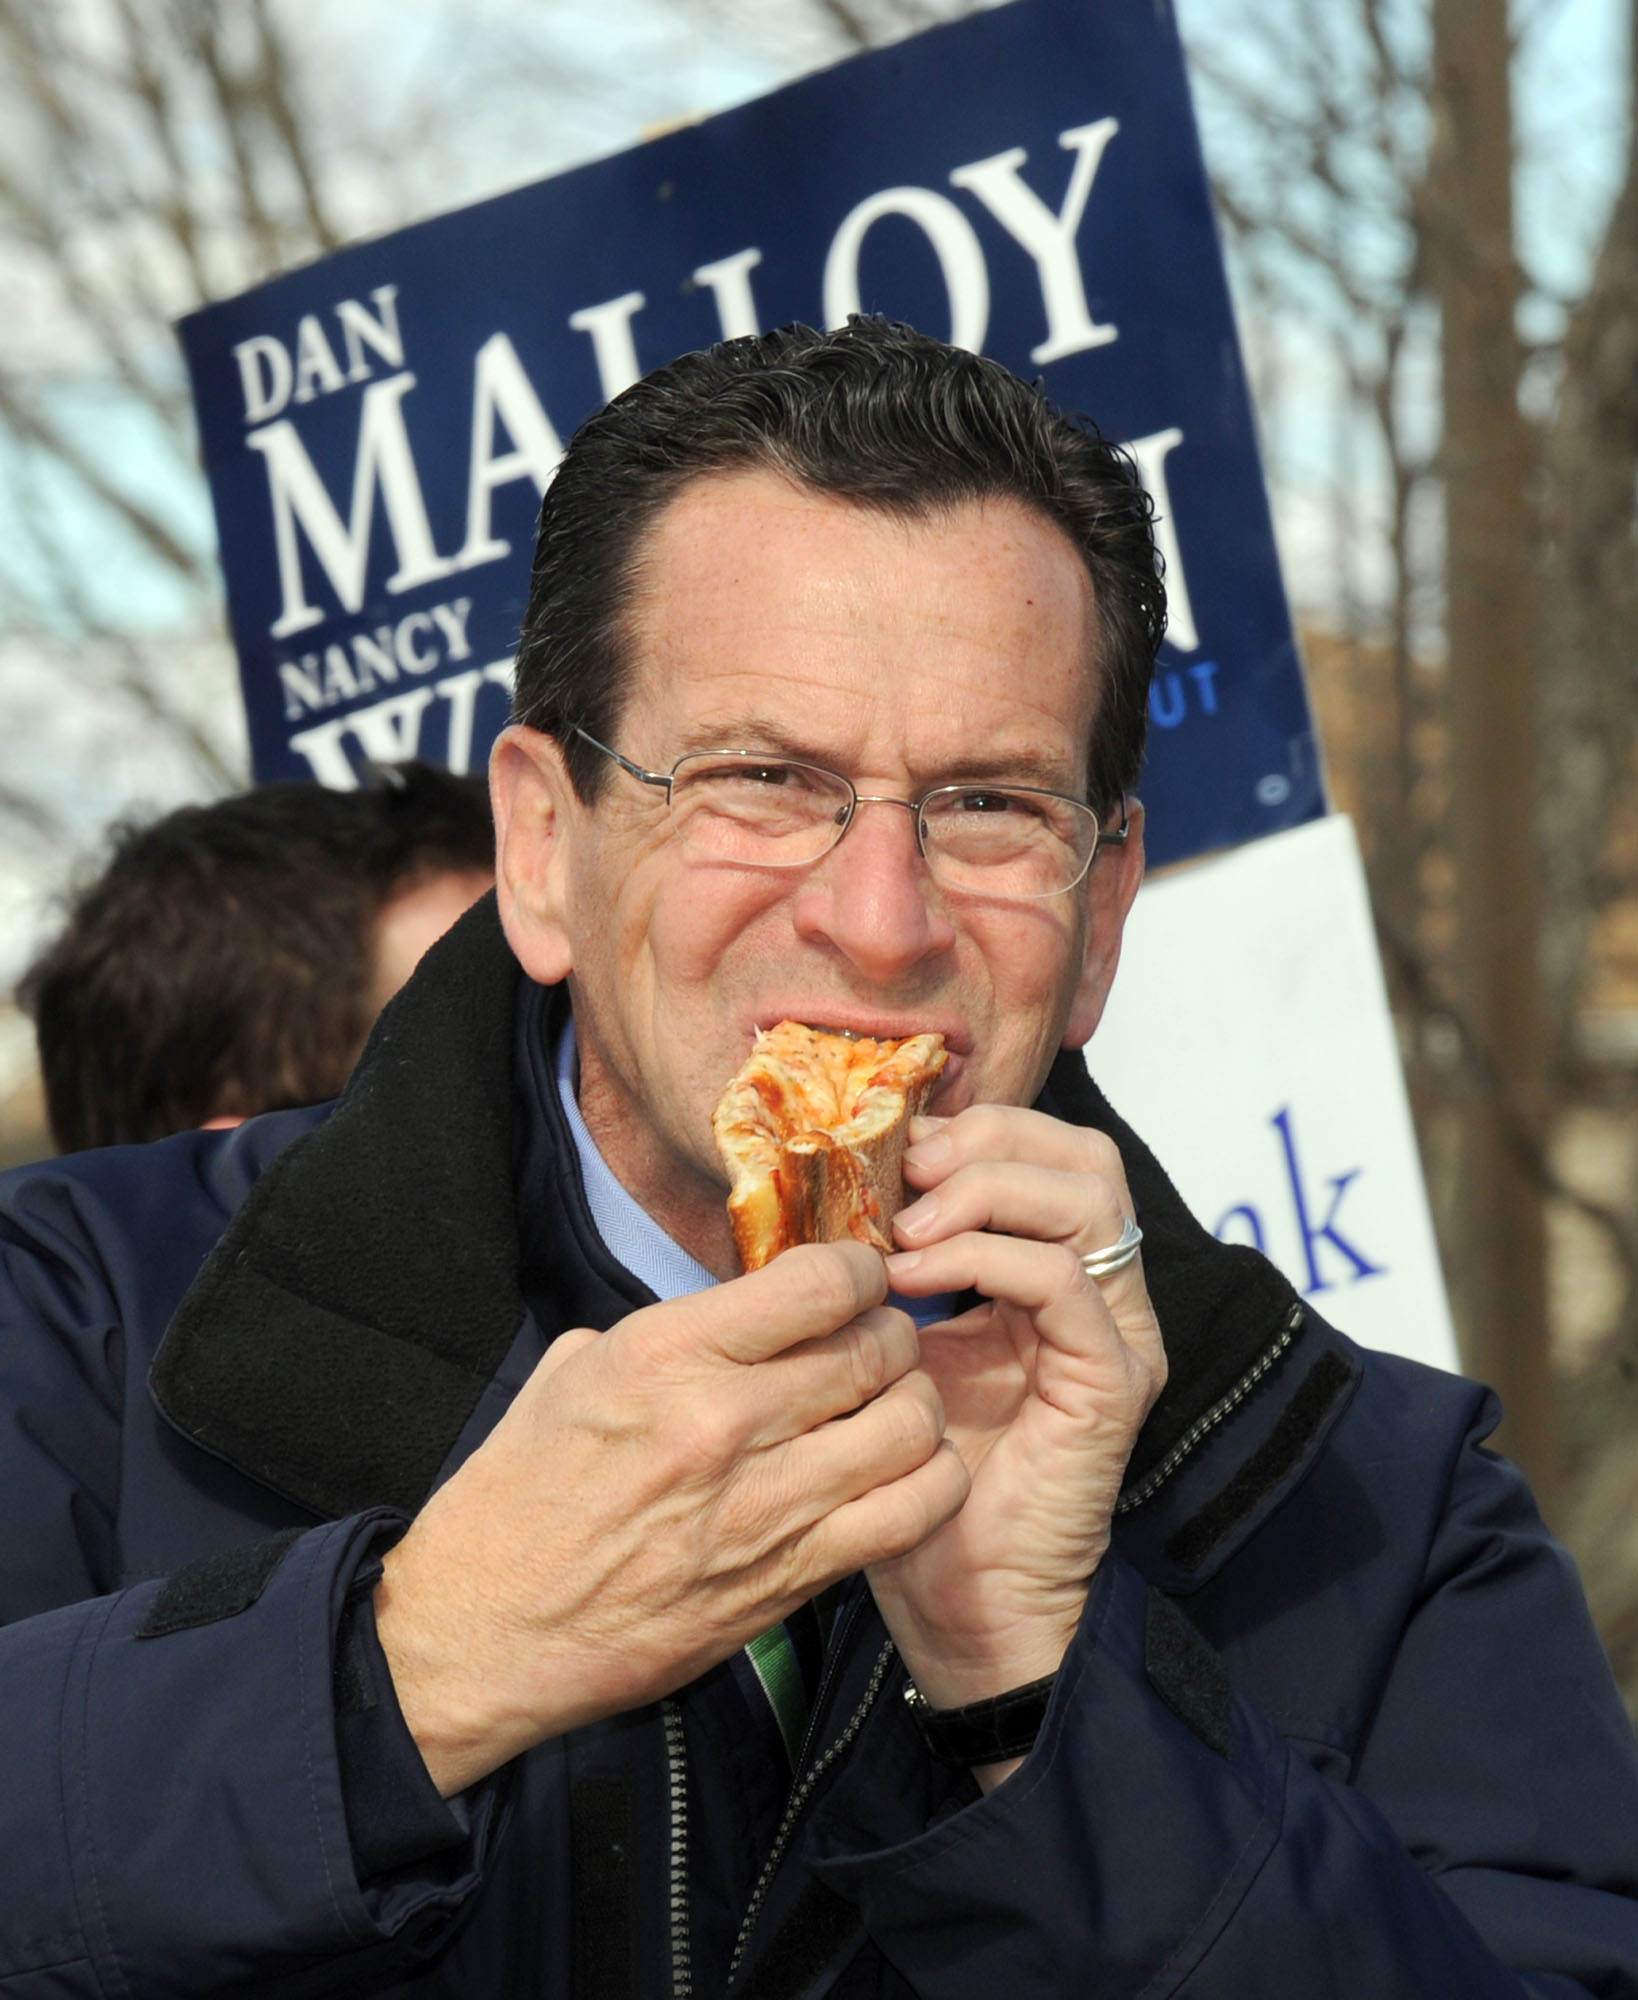 Gov. Dannel Malloy, still just candidate Malloy, grabs a quick slice of pizza during an Election Day stop in Danbury. 